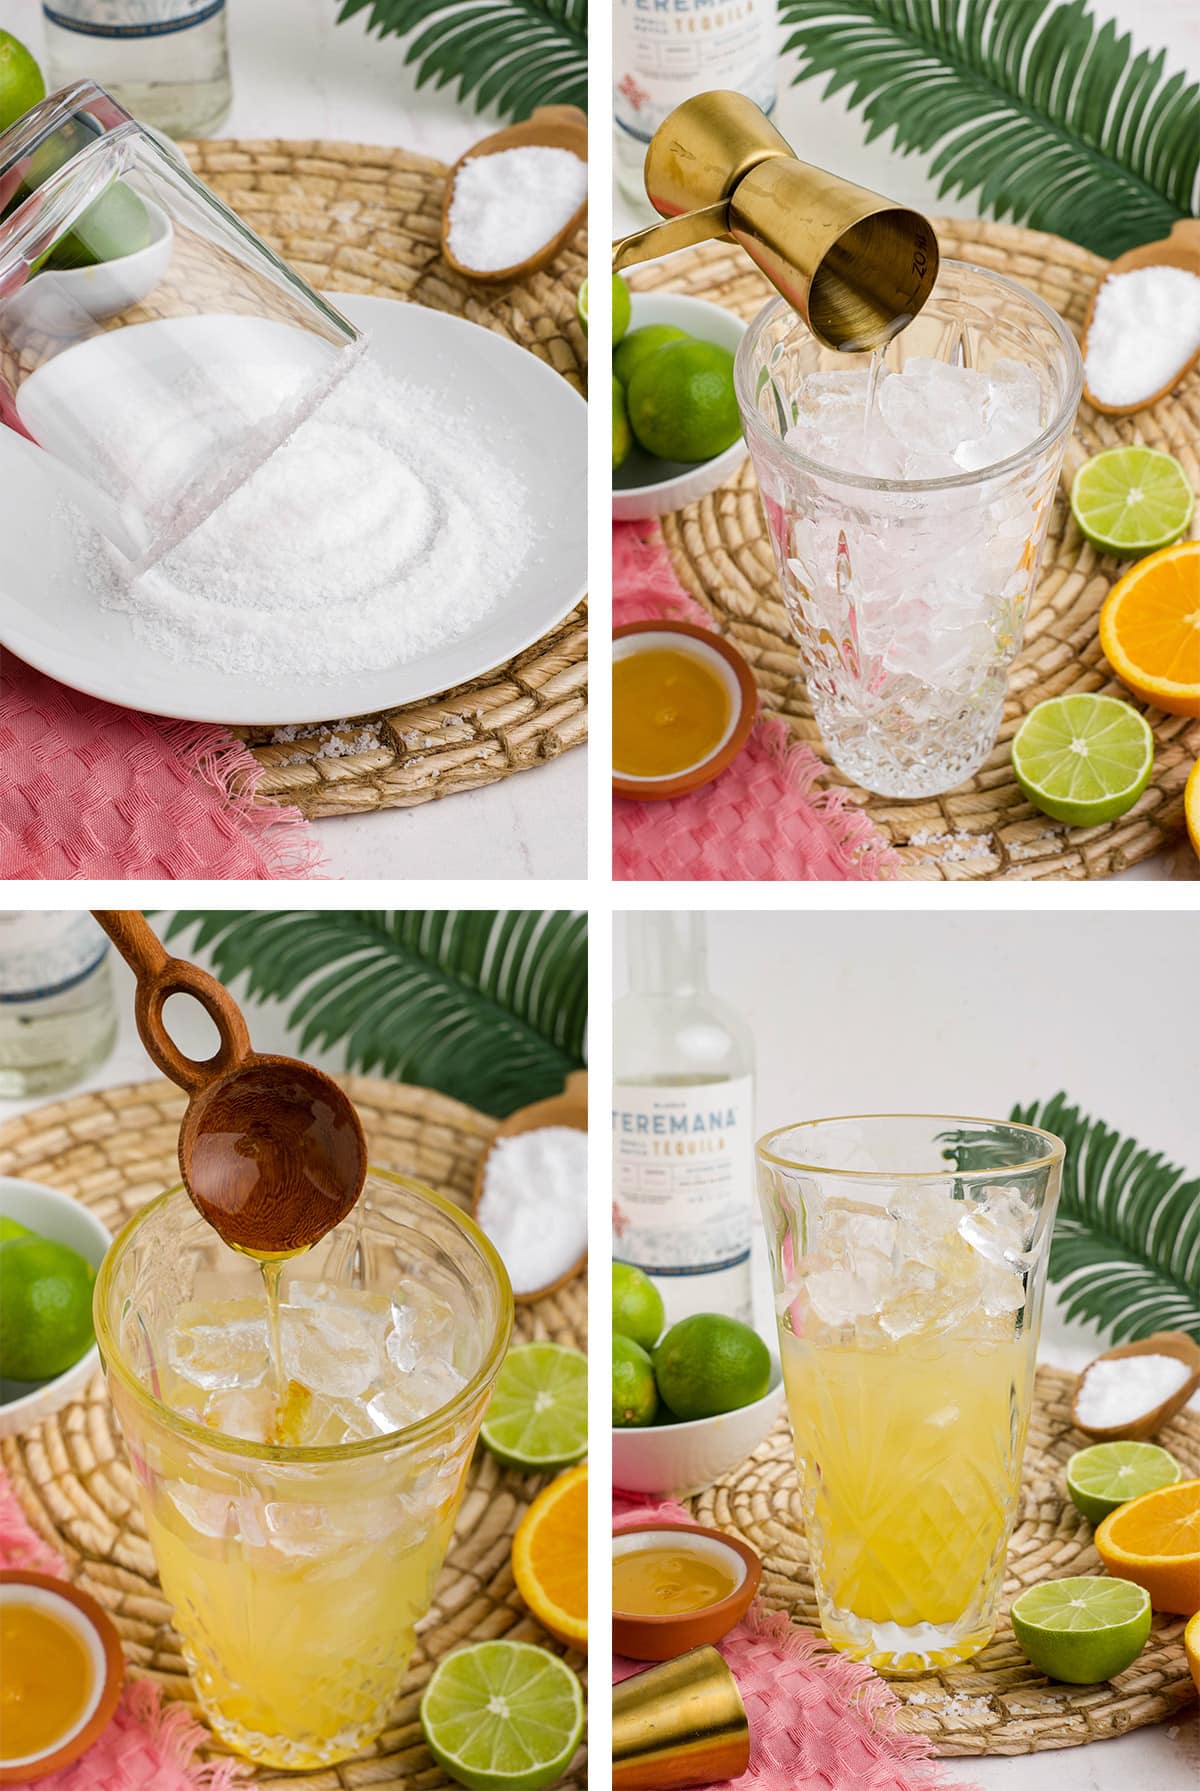 Images showing the steps for making a skinny margaritas.